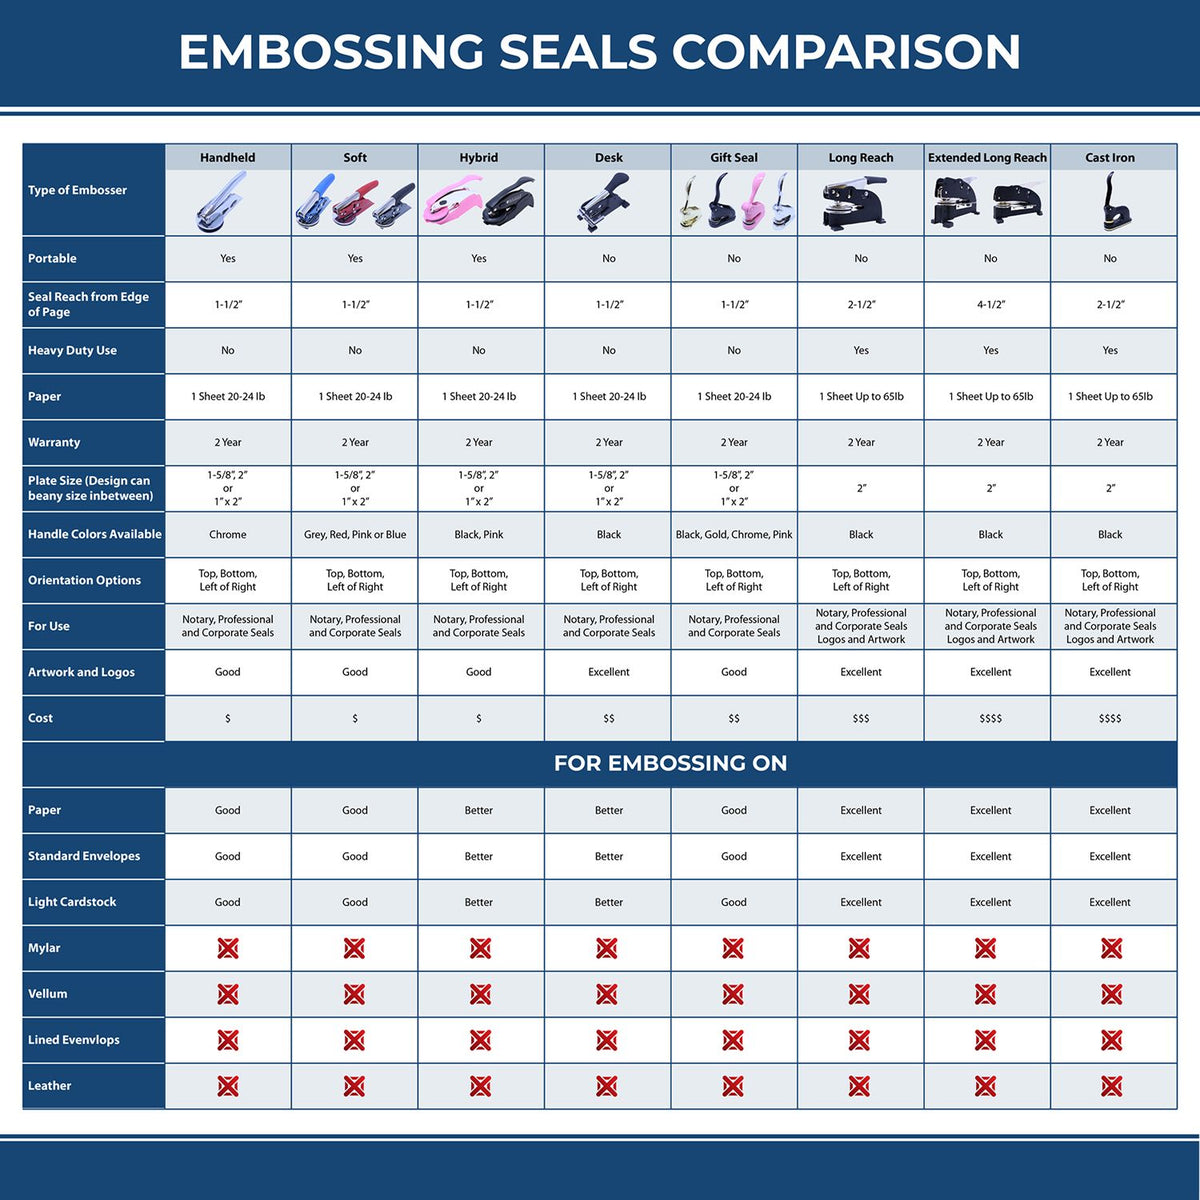 A comparison chart for the different types of mount models available for the State of Washington Extended Long Reach Engineer Seal.